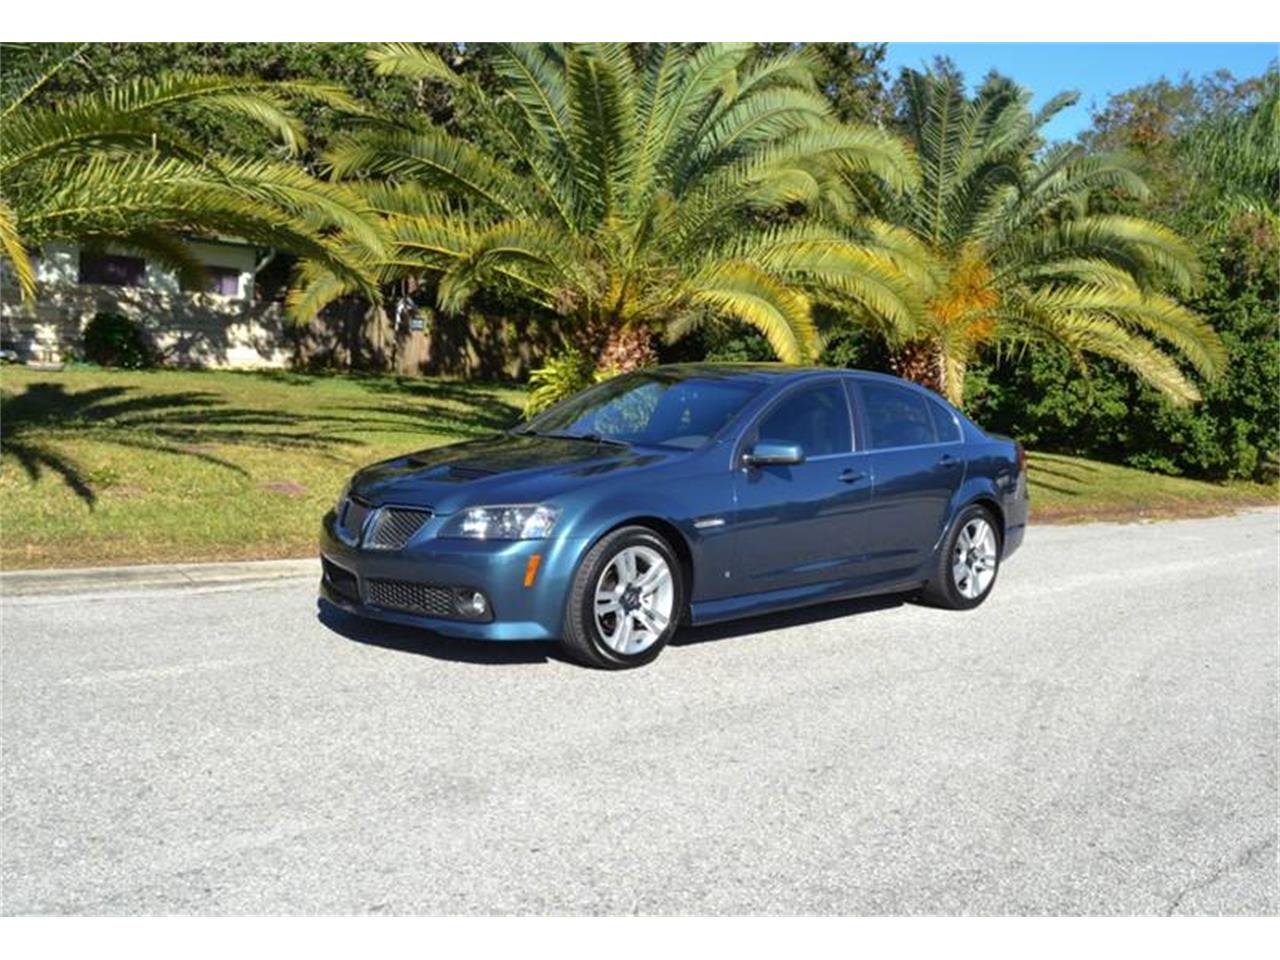 2009 Pontiac G8 for sale in Clearwater, FL